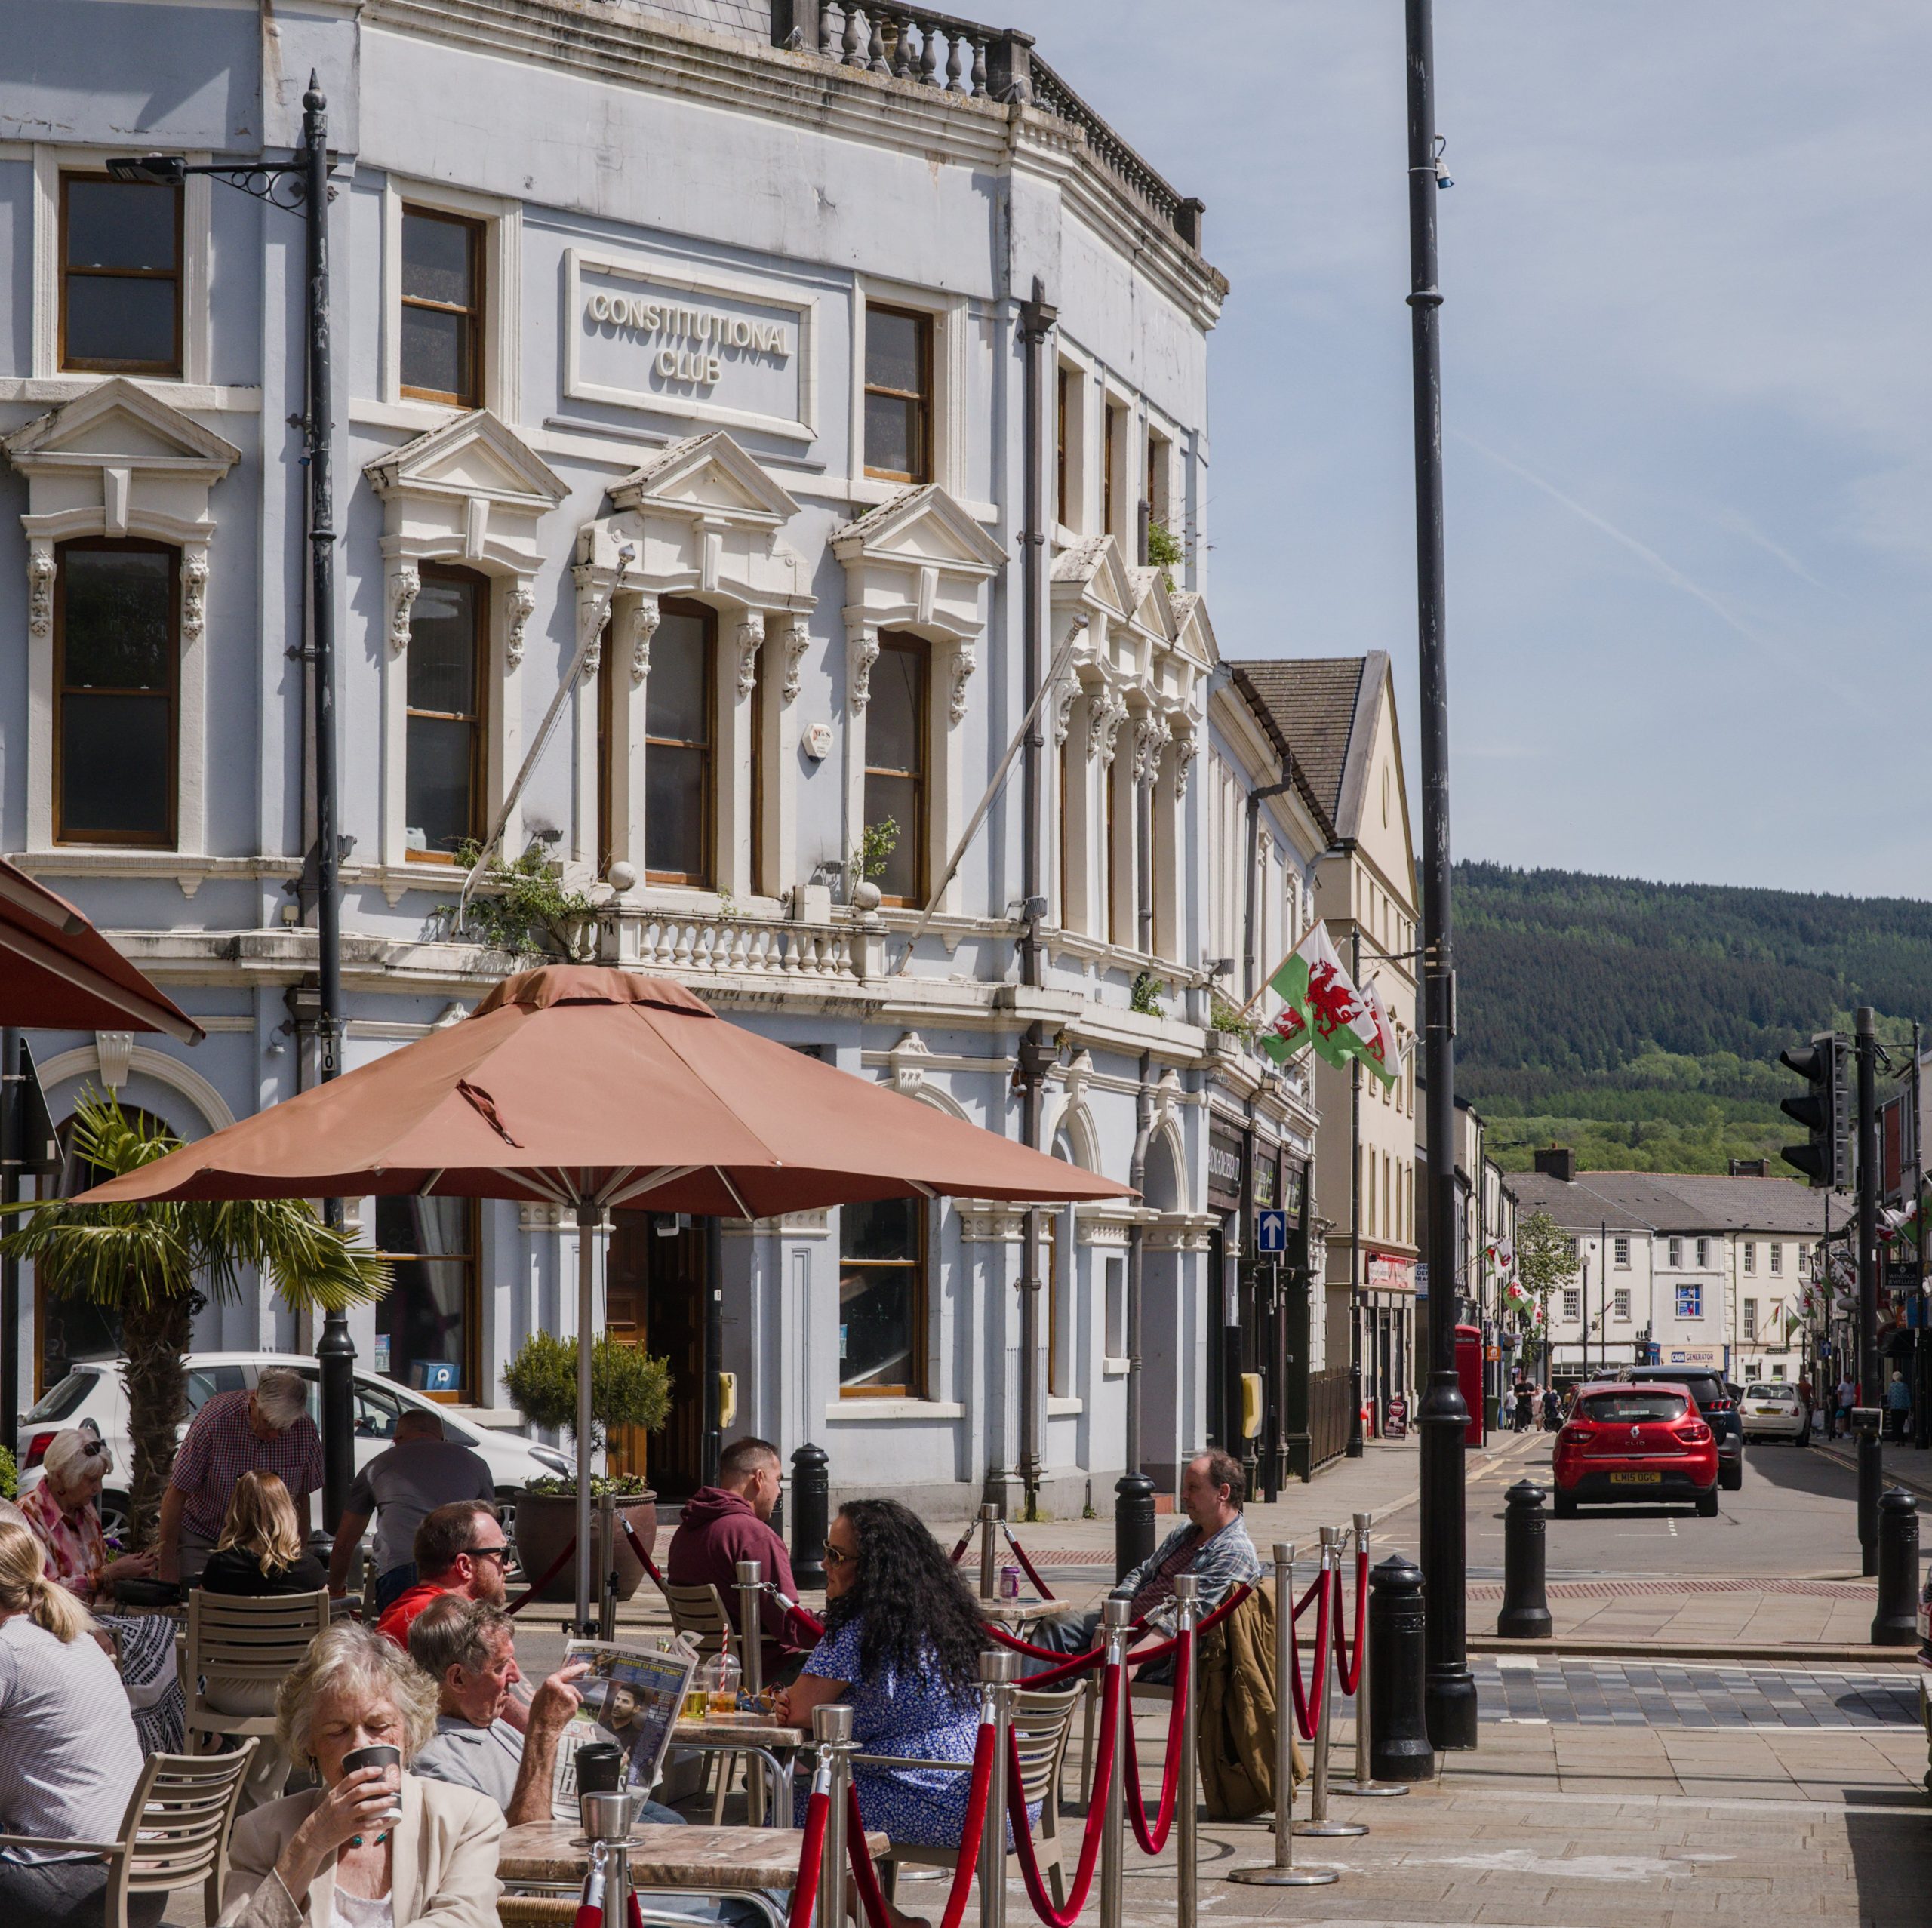 Trivallis Housing Landlord Wales Aberdare street scene featuring people dining outdoors at a cafe. The establishment is set in a light-coloured, ornate building labeled "Constitution Club." The street is lined with various shops, a few cars are parked, and hills are visible in the background.